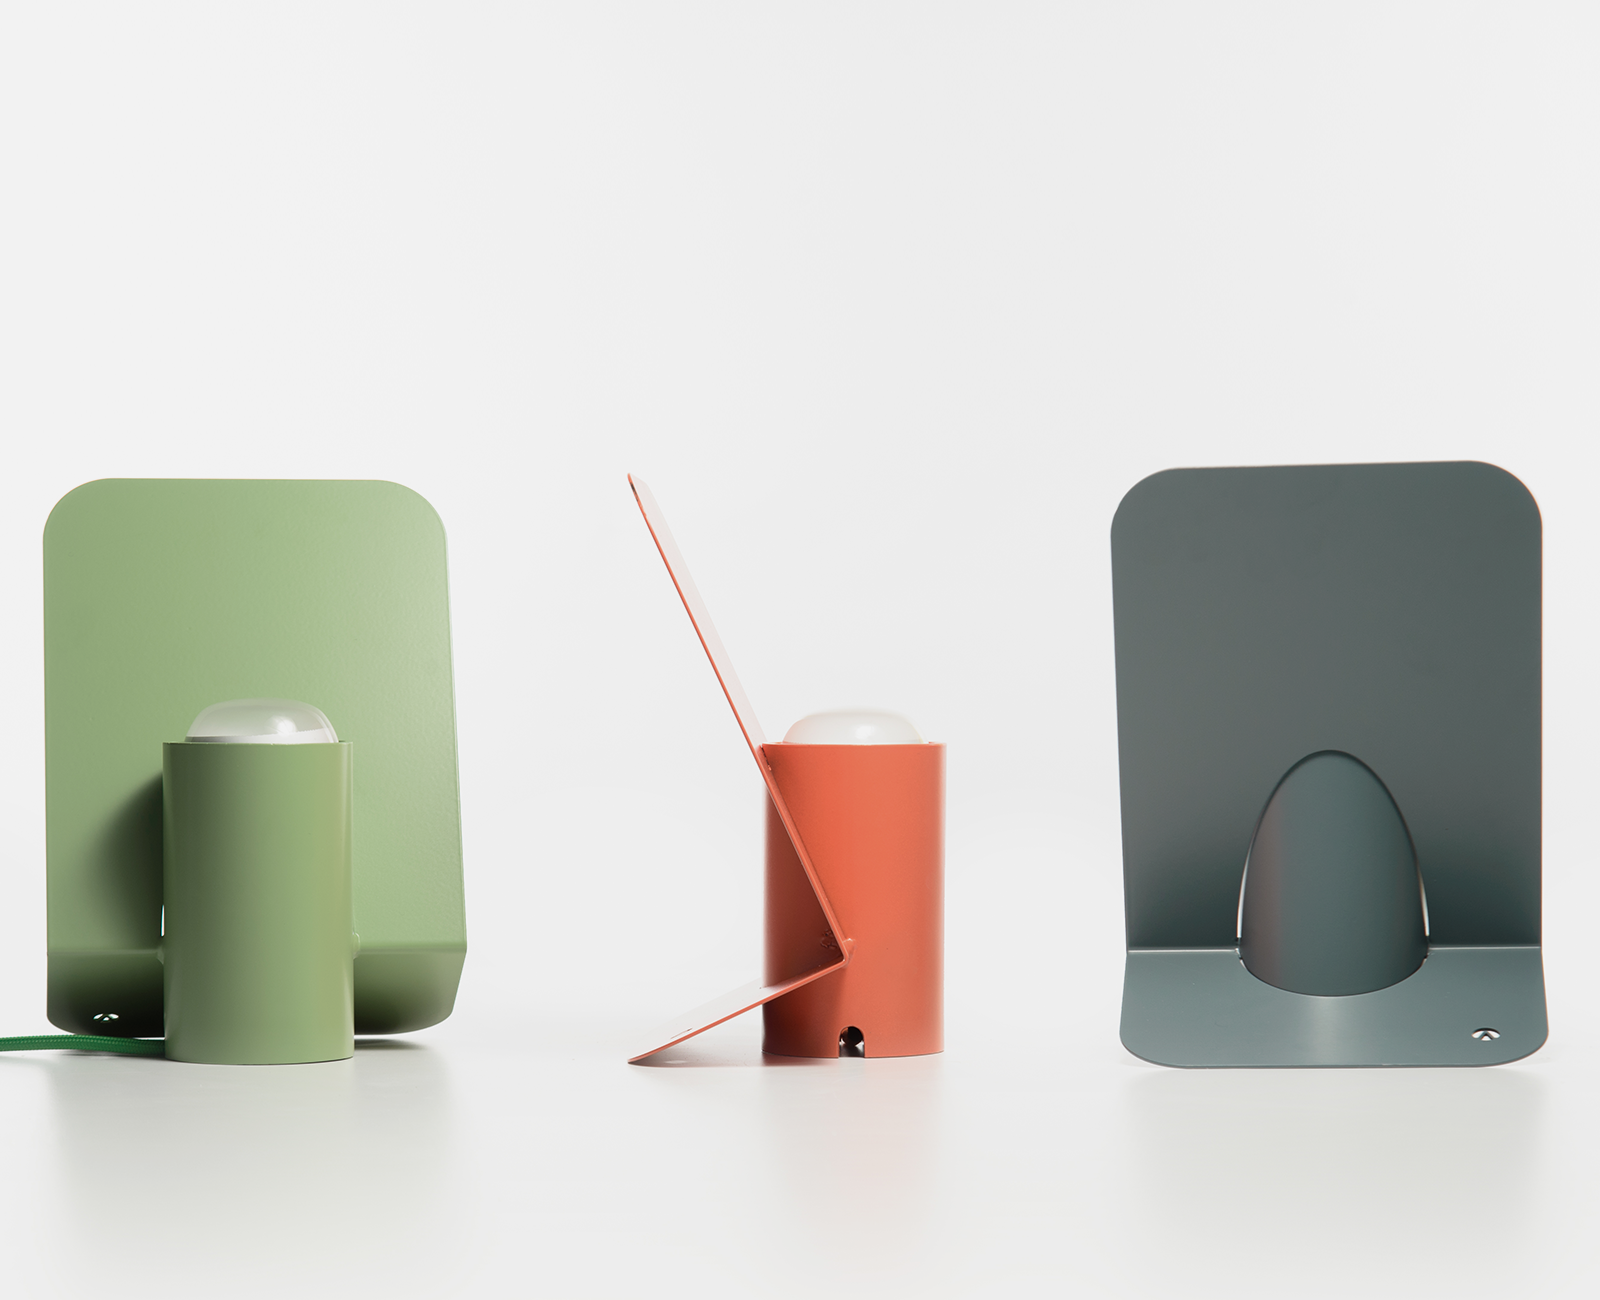 Vela table lamps in three colors